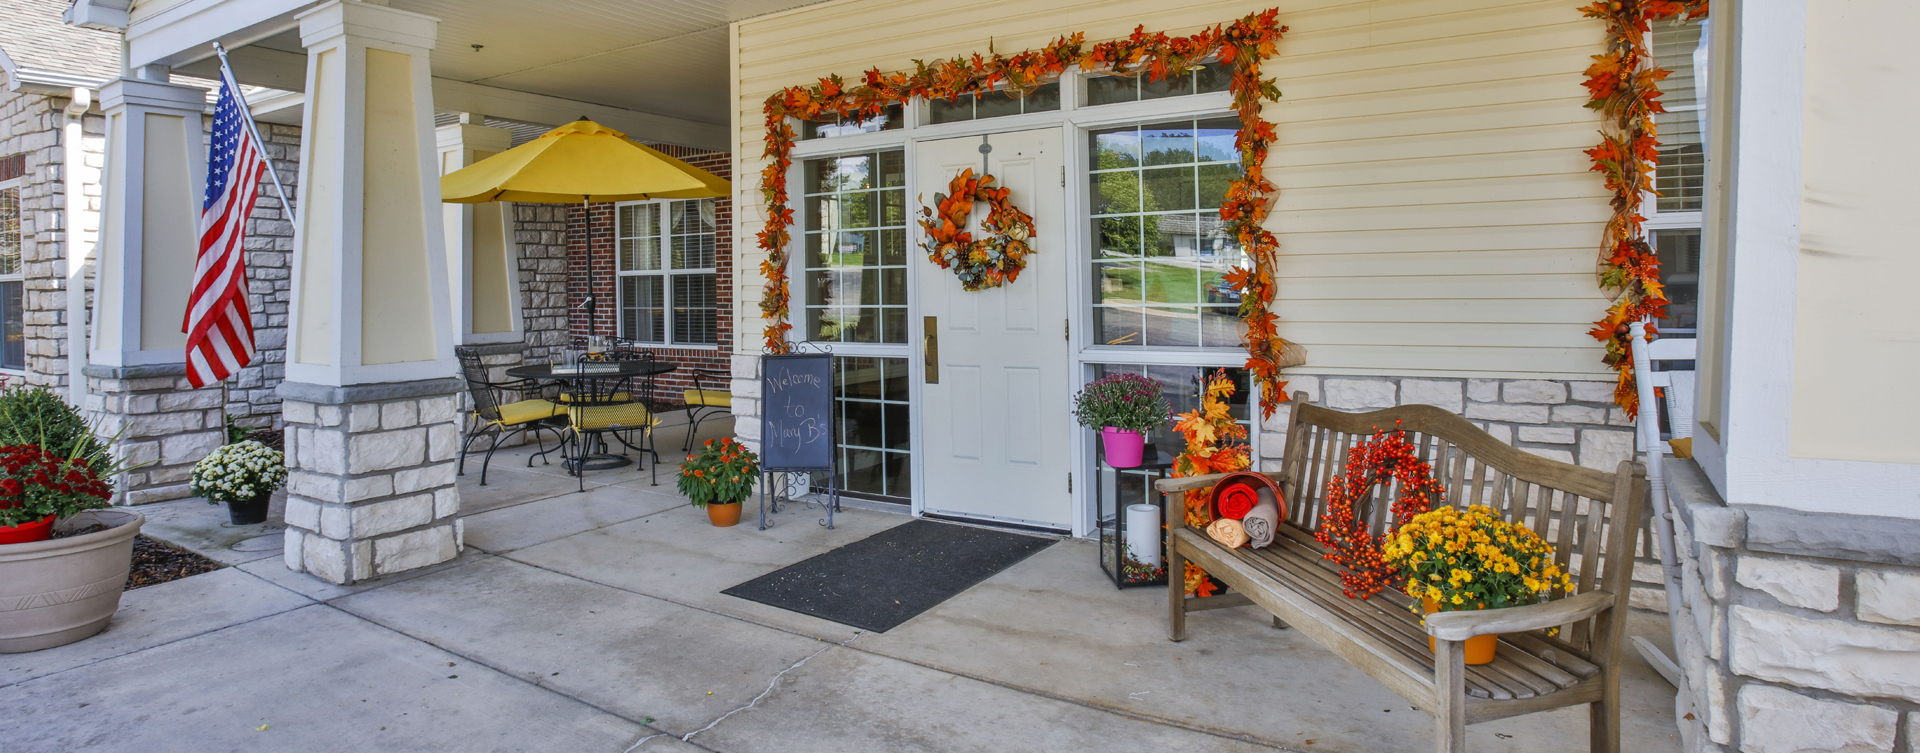 Enjoy conversations with friends on the porch at Bickford of Peoria